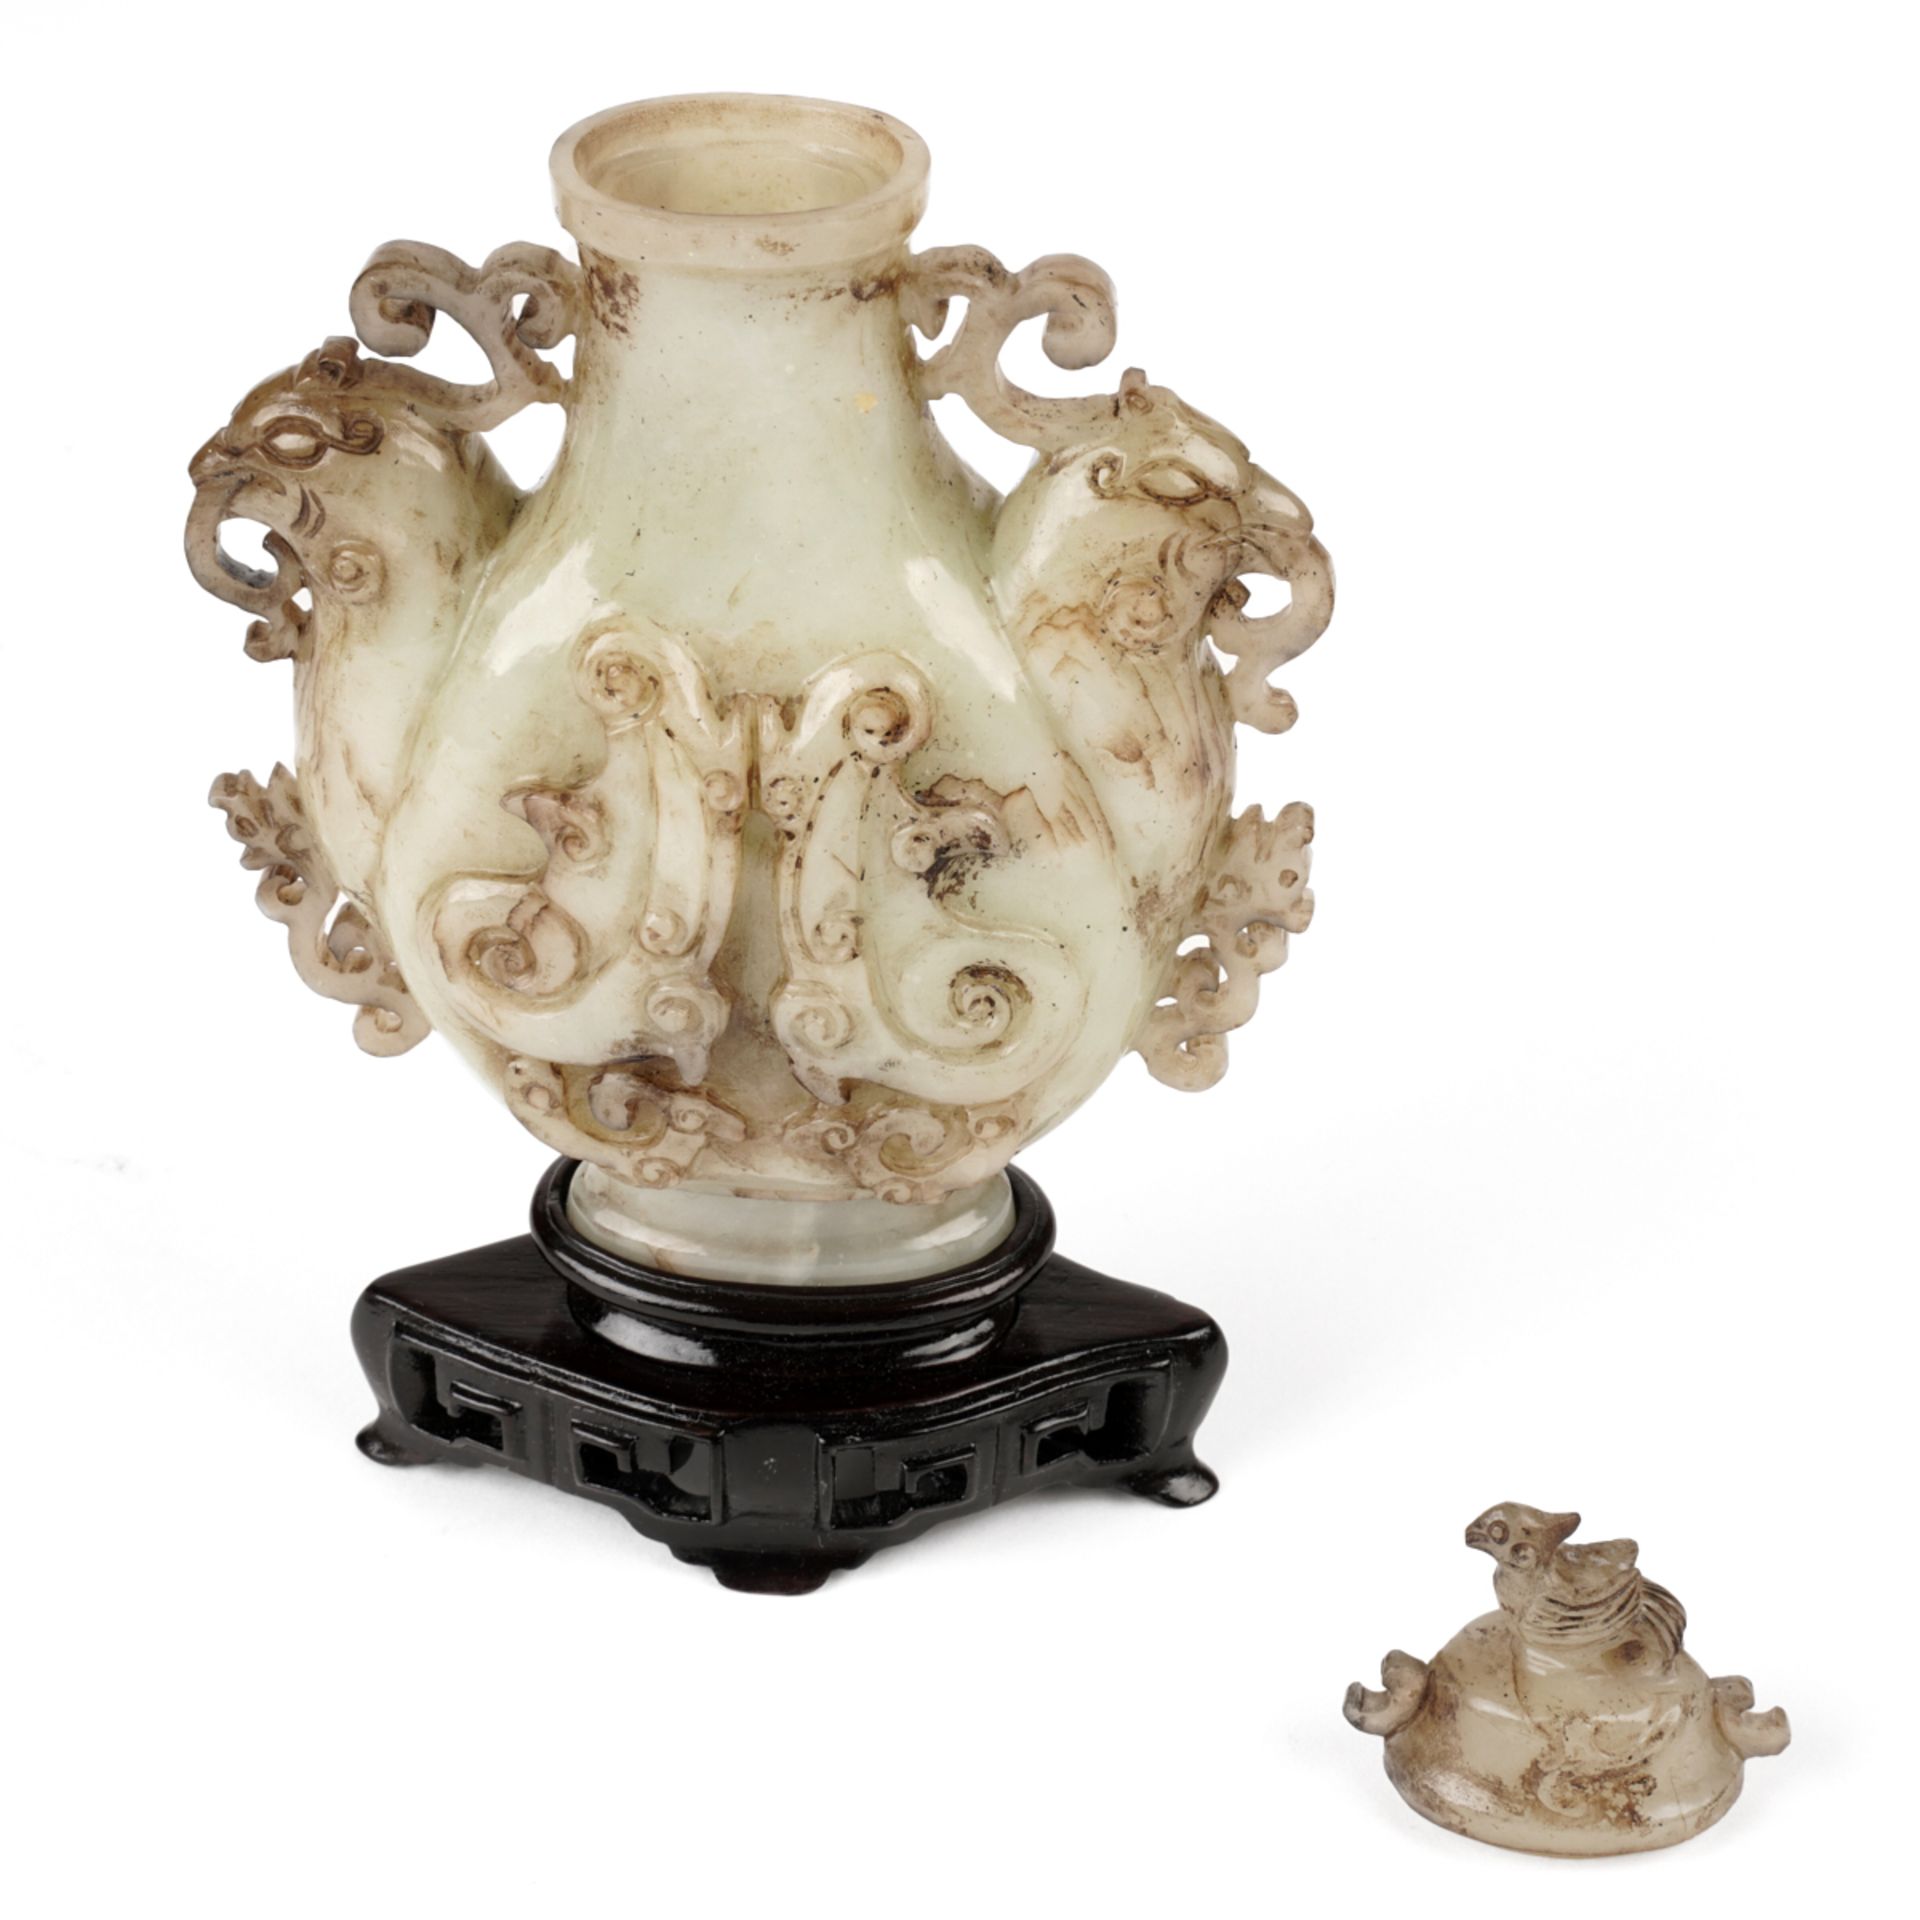 20th c. Chinese Carved Jade Vase w/ Stand - Image 5 of 5